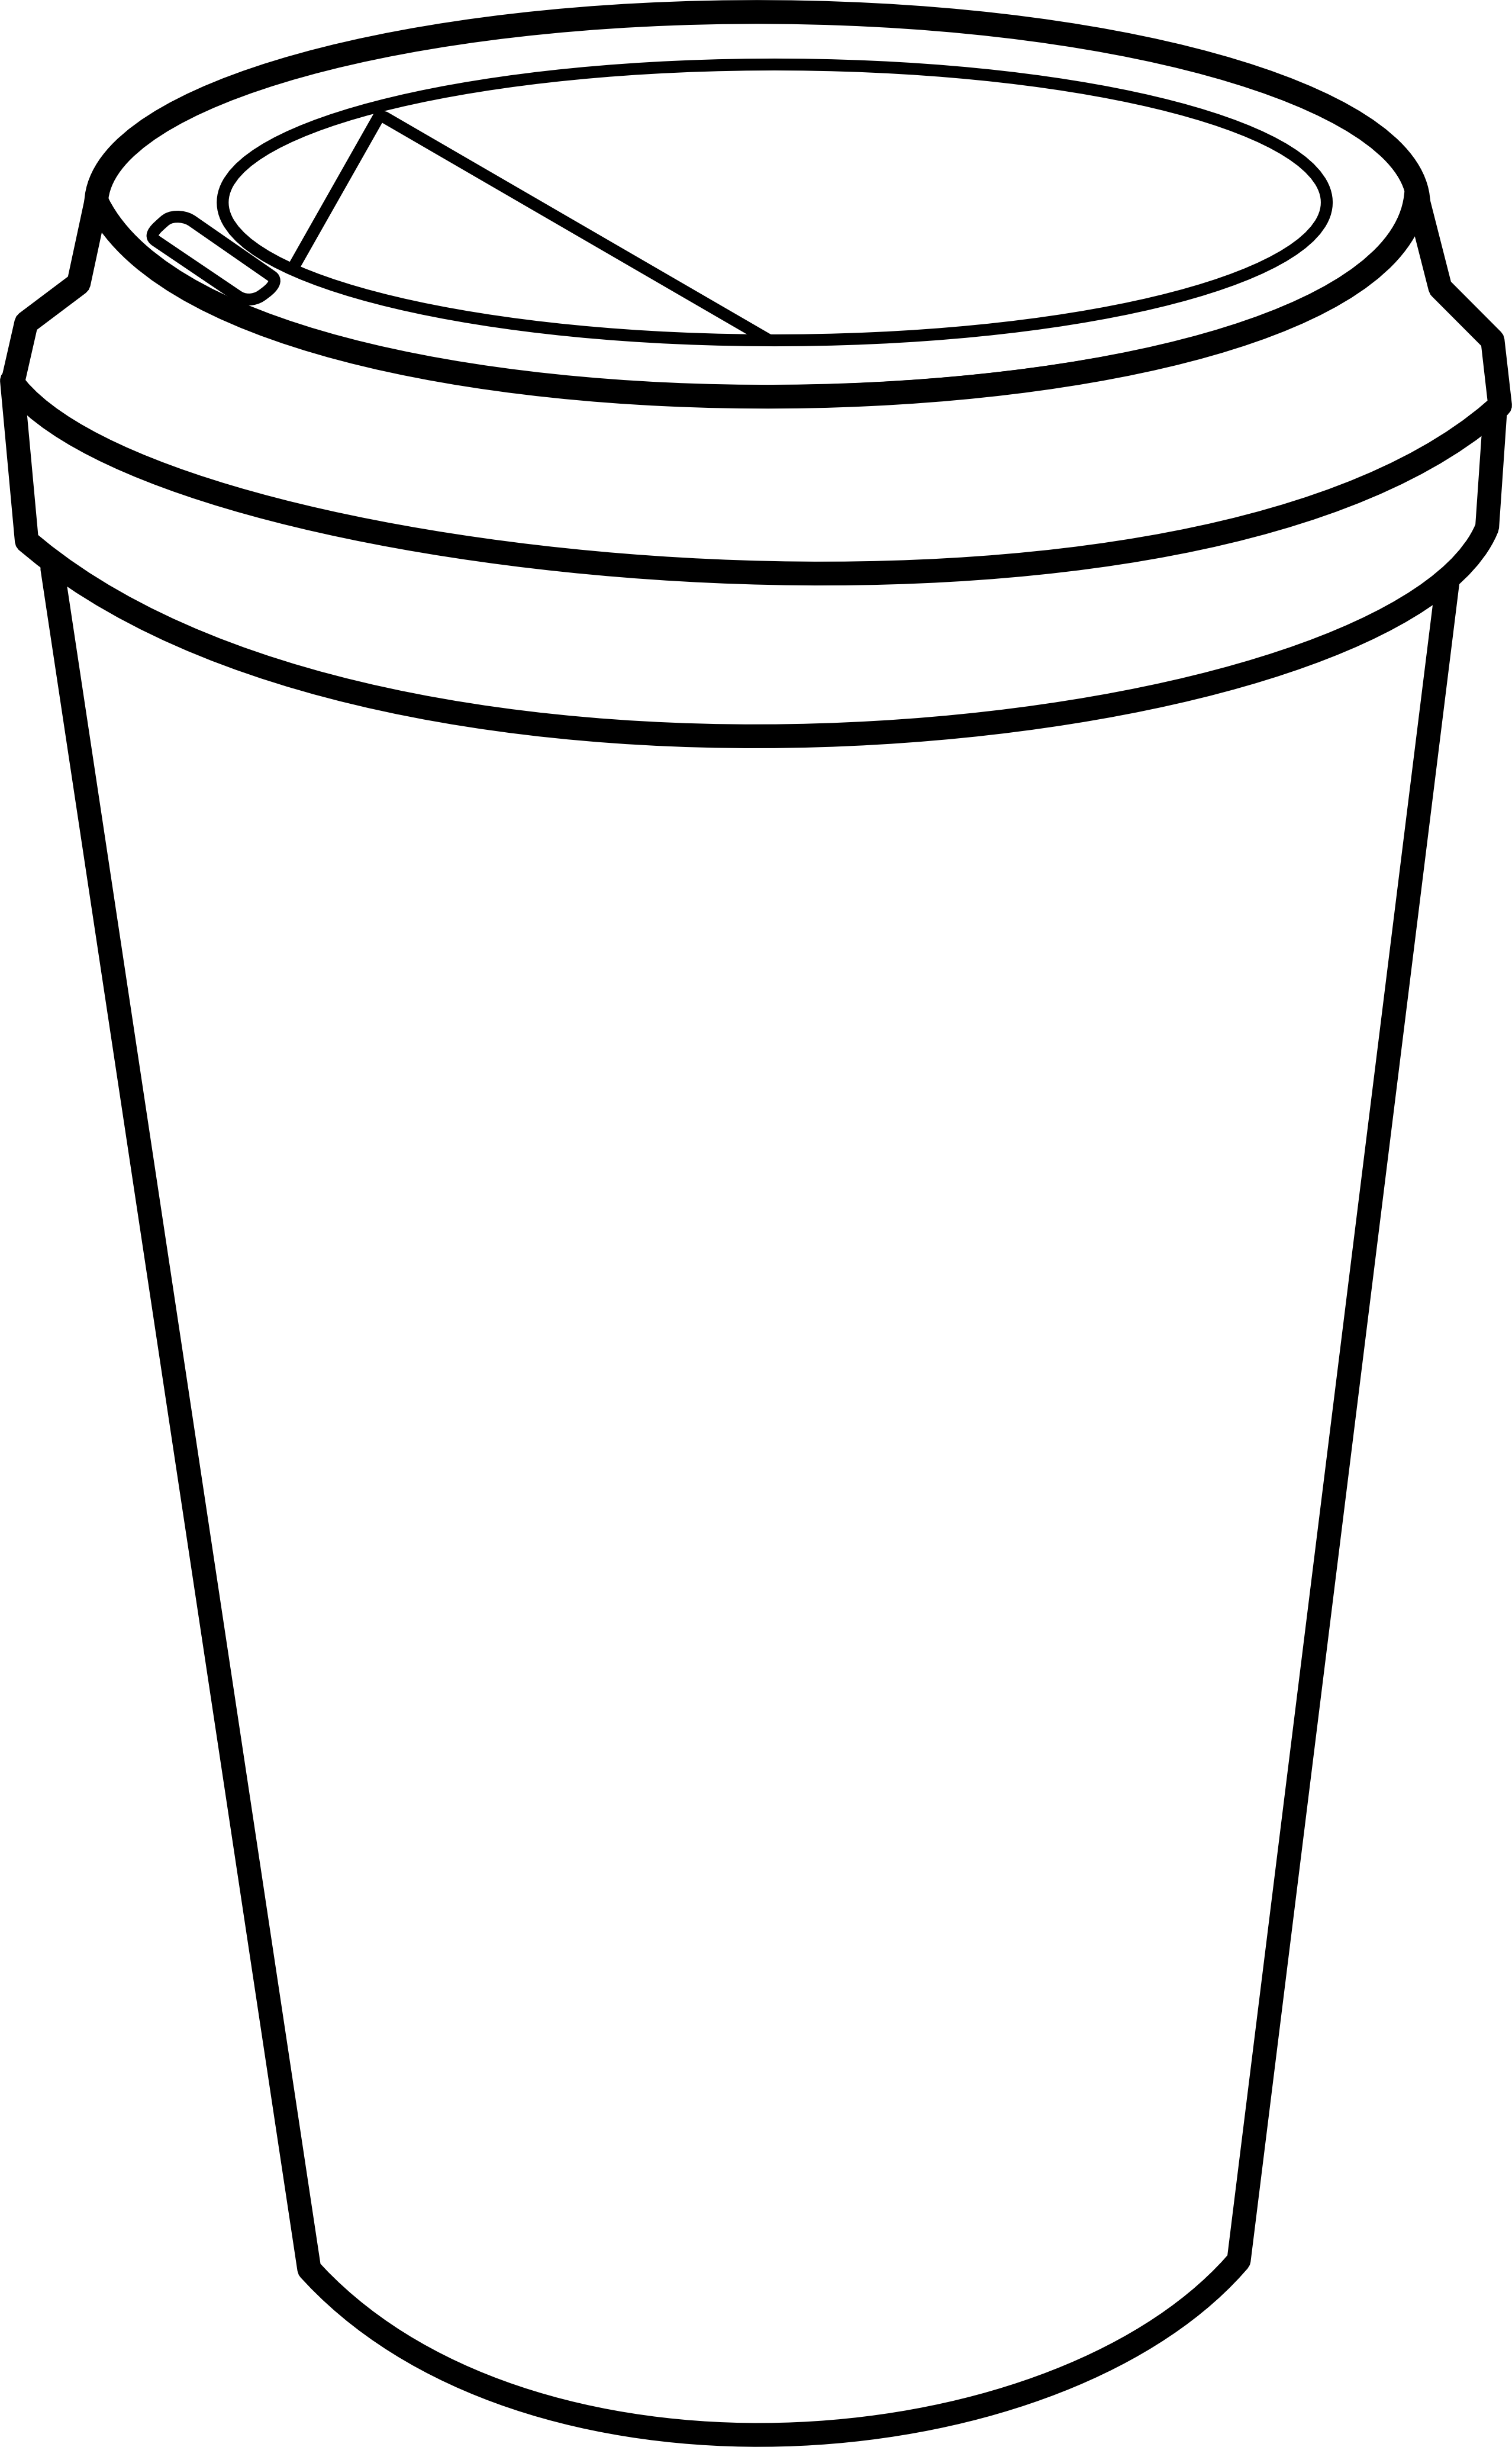 cup coloring page cups coloring pages download and print for free page cup coloring 